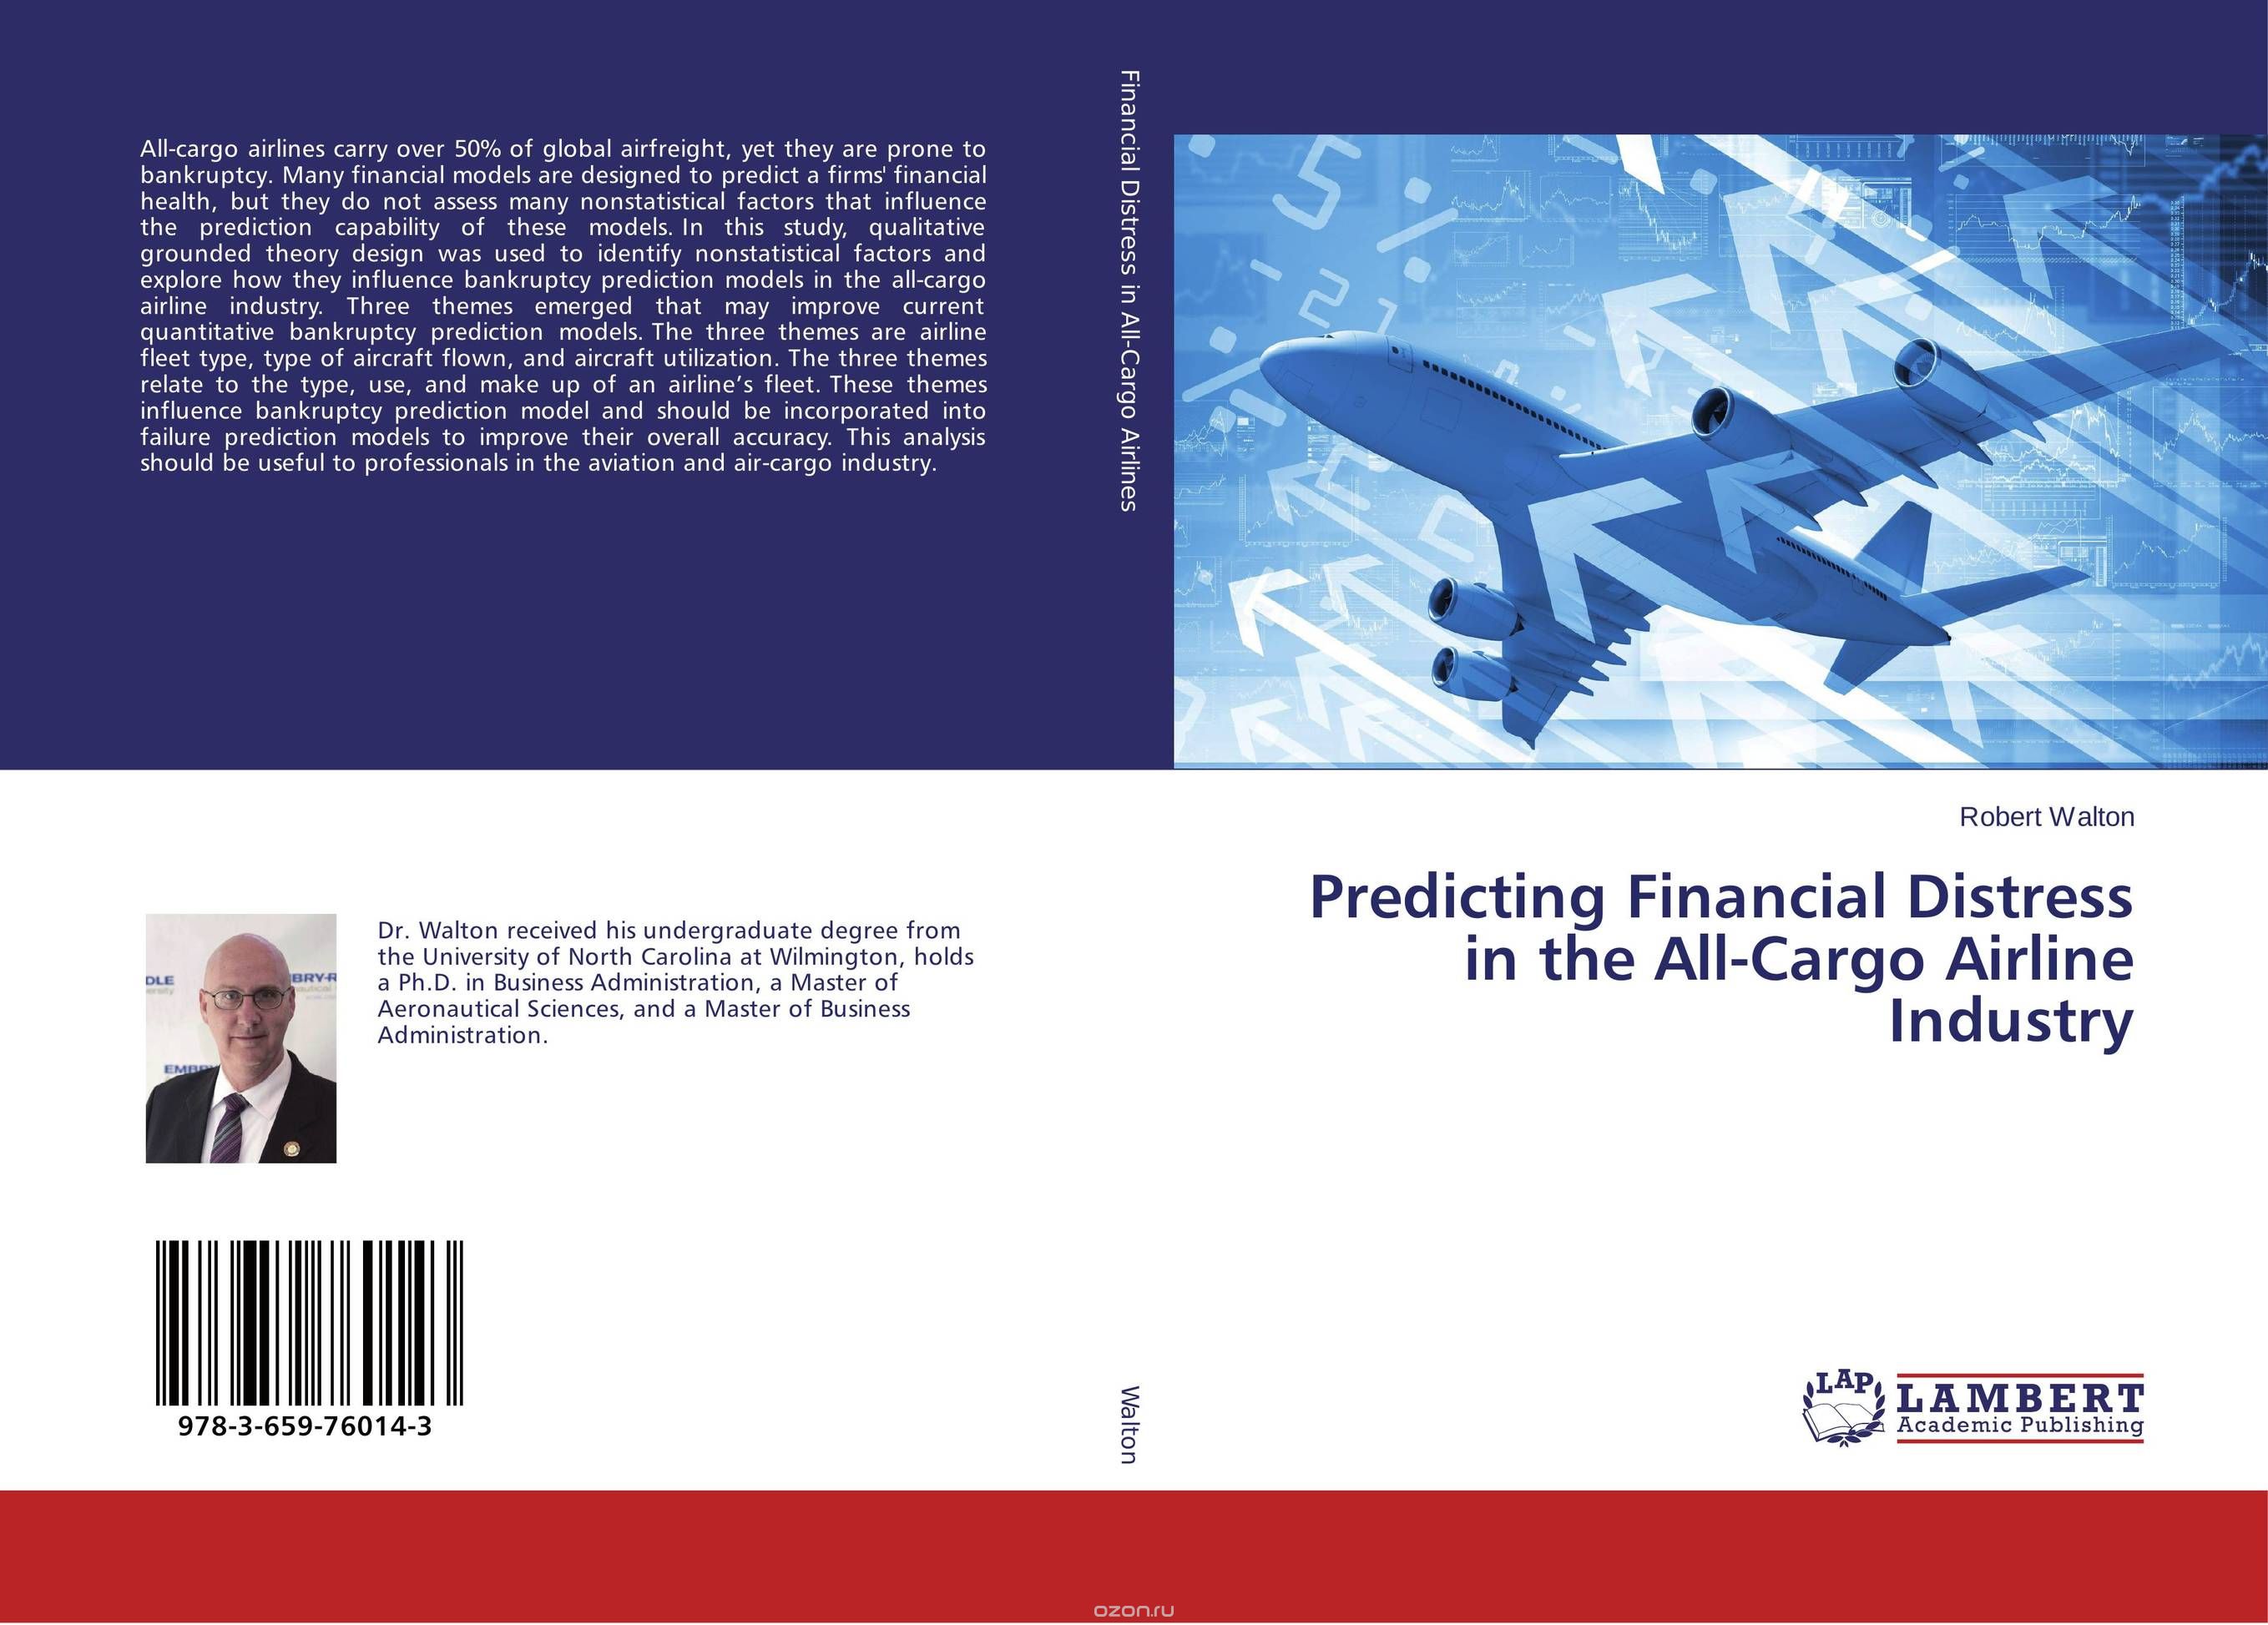 Скачать книгу "Predicting Financial Distress in the All-Cargo Airline Industry"